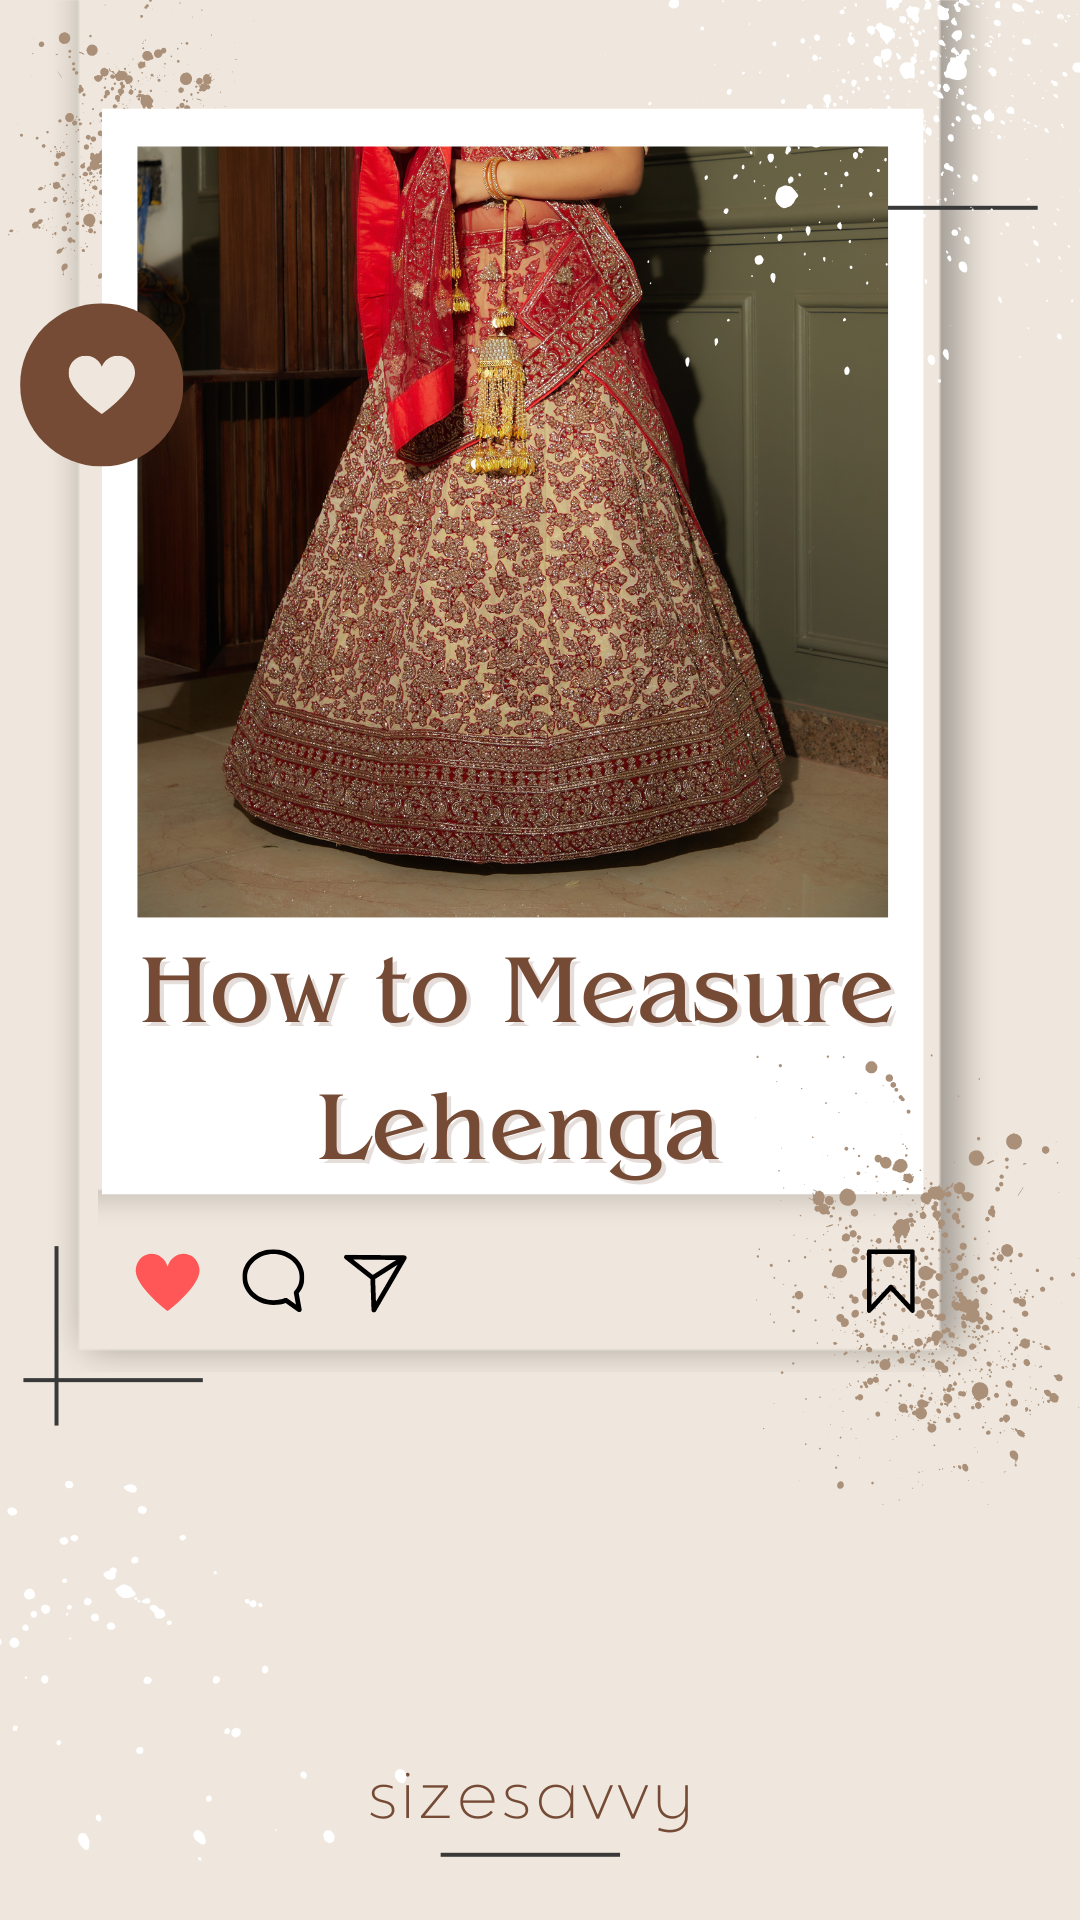 Download Just In - Bridal Lehenga Measurements PNG Image with No Background  - PNGkey.com